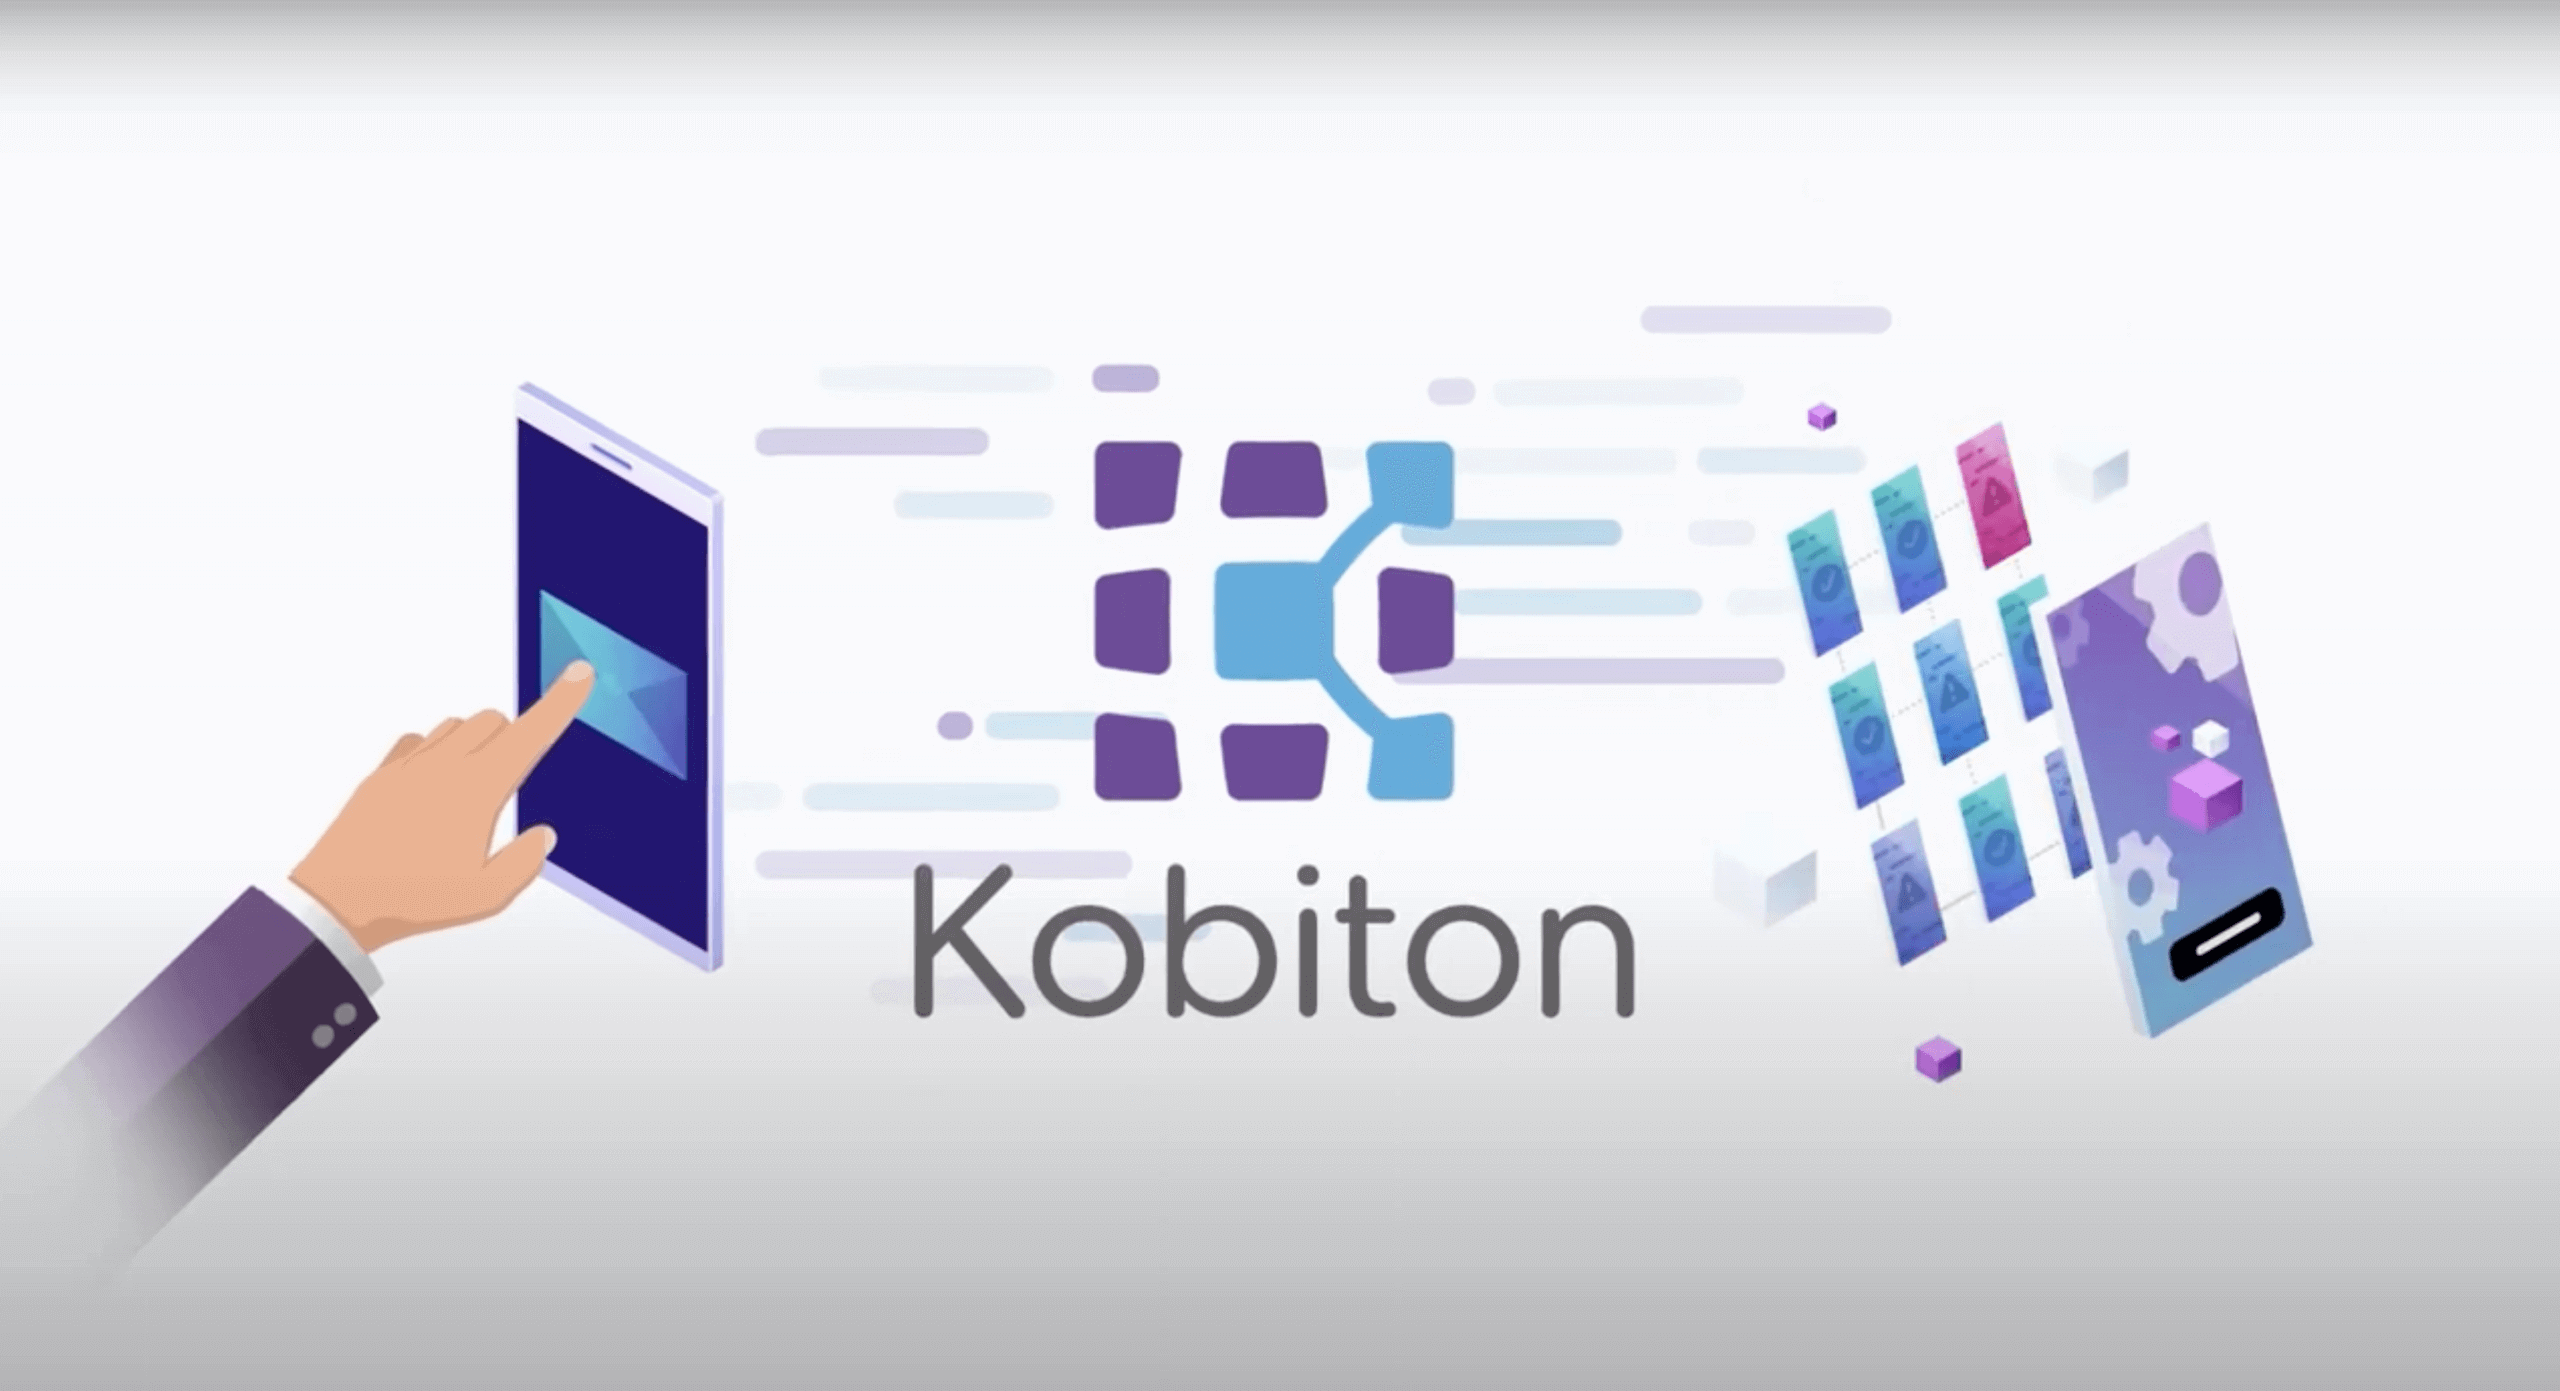 Illustration of a Kobiton logo and a man using an Ipad with it